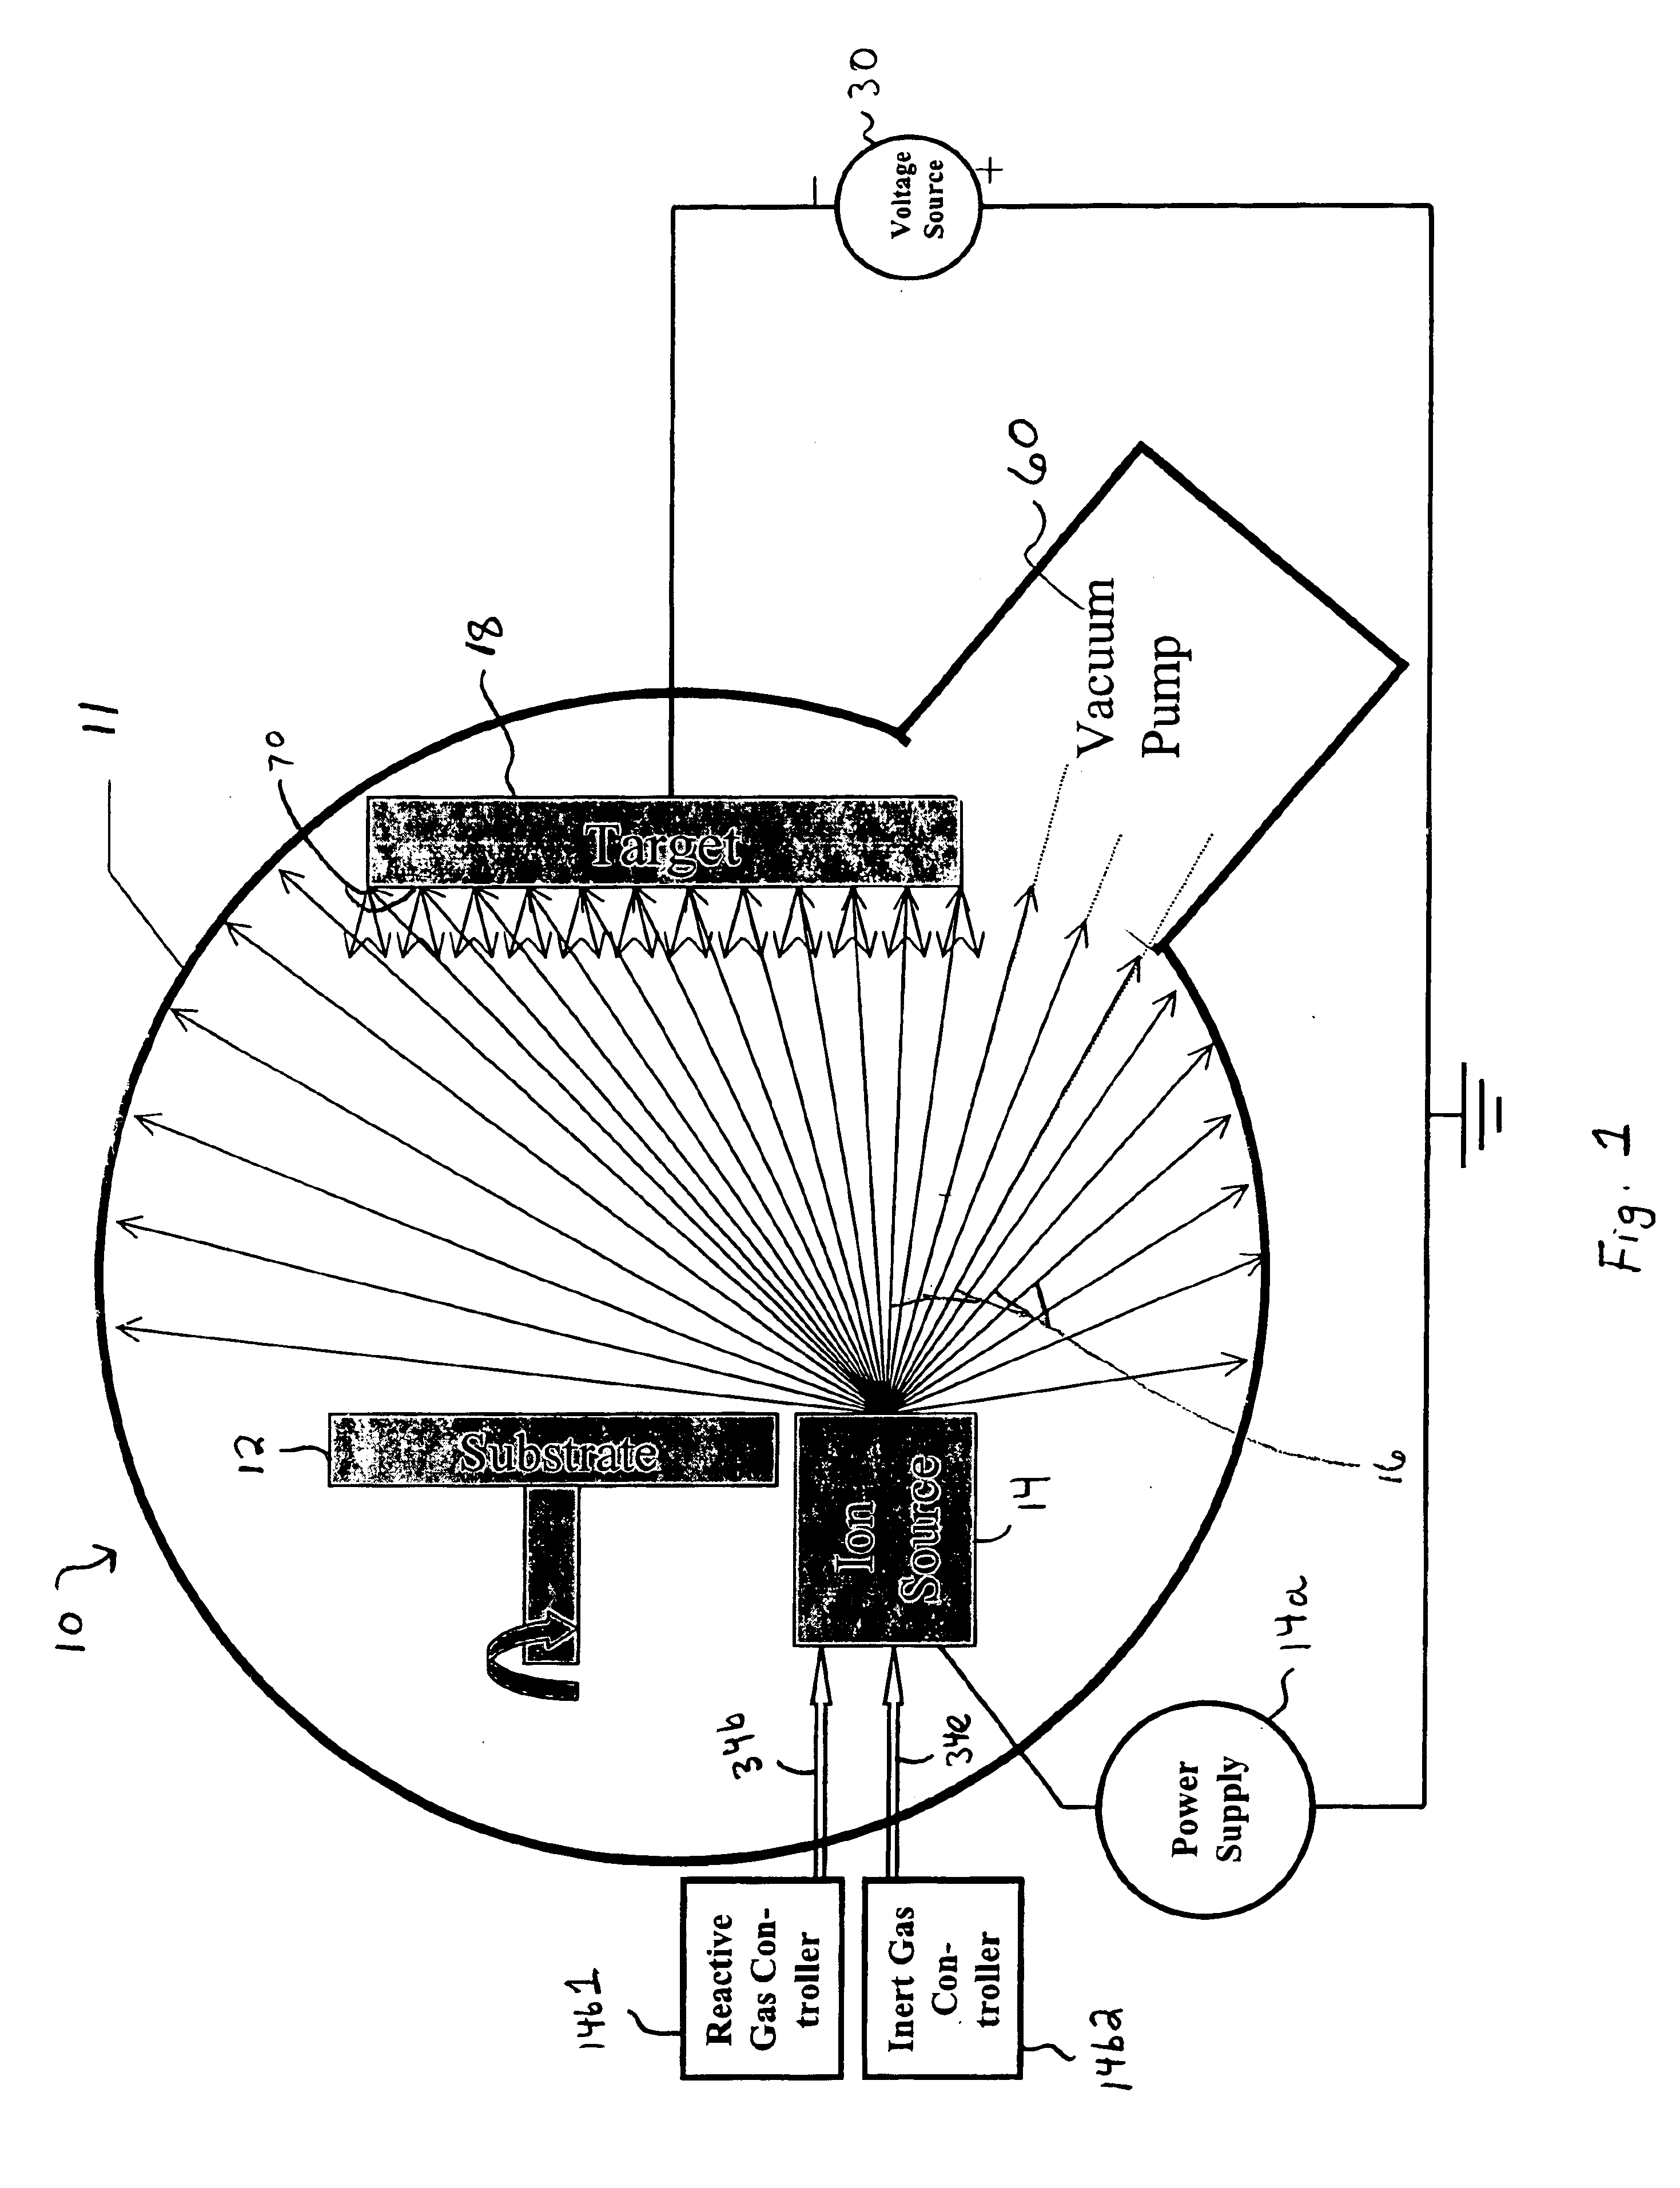 System and method for performing thin film deposition or chemical treatment using an energetic flux of neutral reactive molecular fragments, atoms or radicals